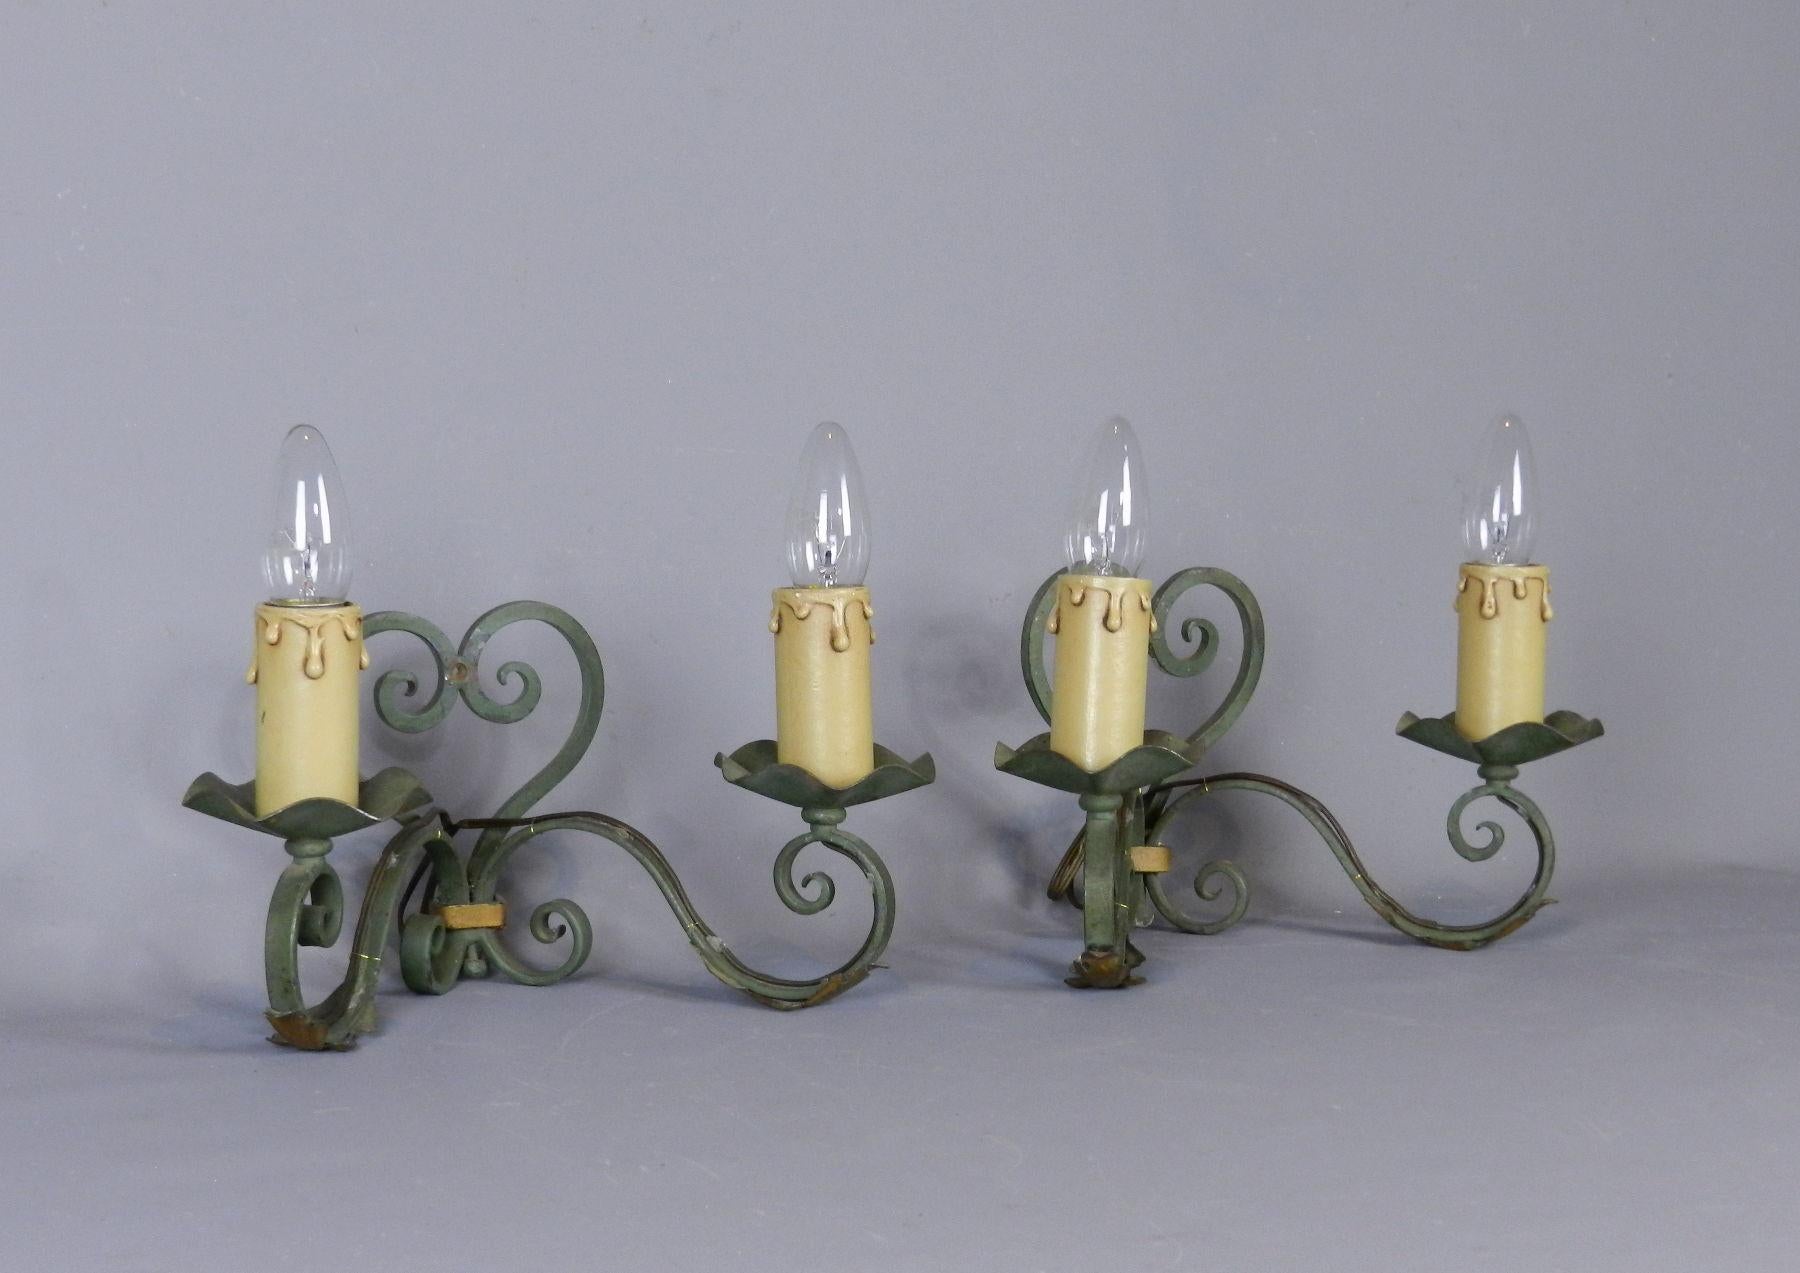 A Pretty Pair of twin-armed Wall Sconces made of hand-forged steel and tole. Painted in original faded green with foliate gilt highlights and decorative heart-shaped mount.

These lights are fitted with bayonet candle light bulbs and have been